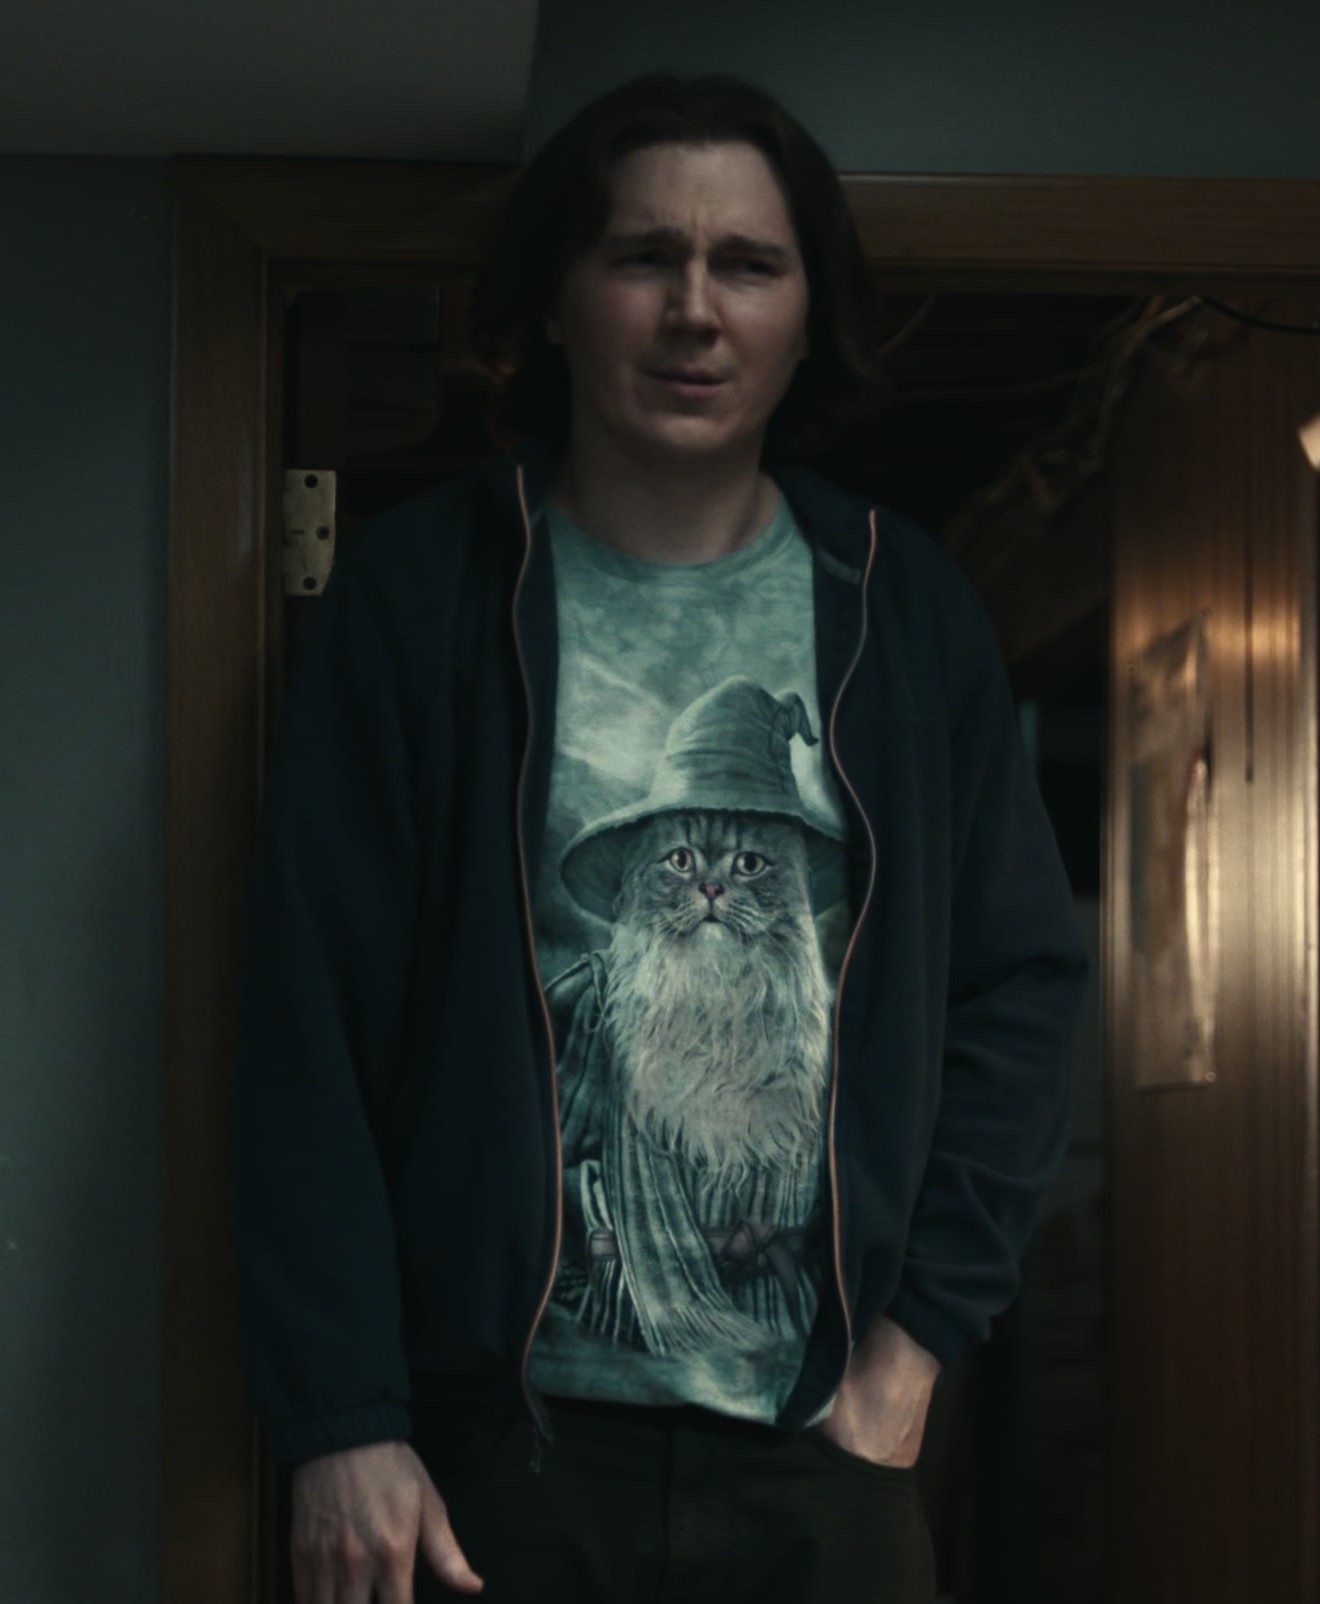 Worn on Dumb Money (2023) Movie - Catdalf - Cat Gandalf T-Shirt Worn by Paul Dano as Keith Gill